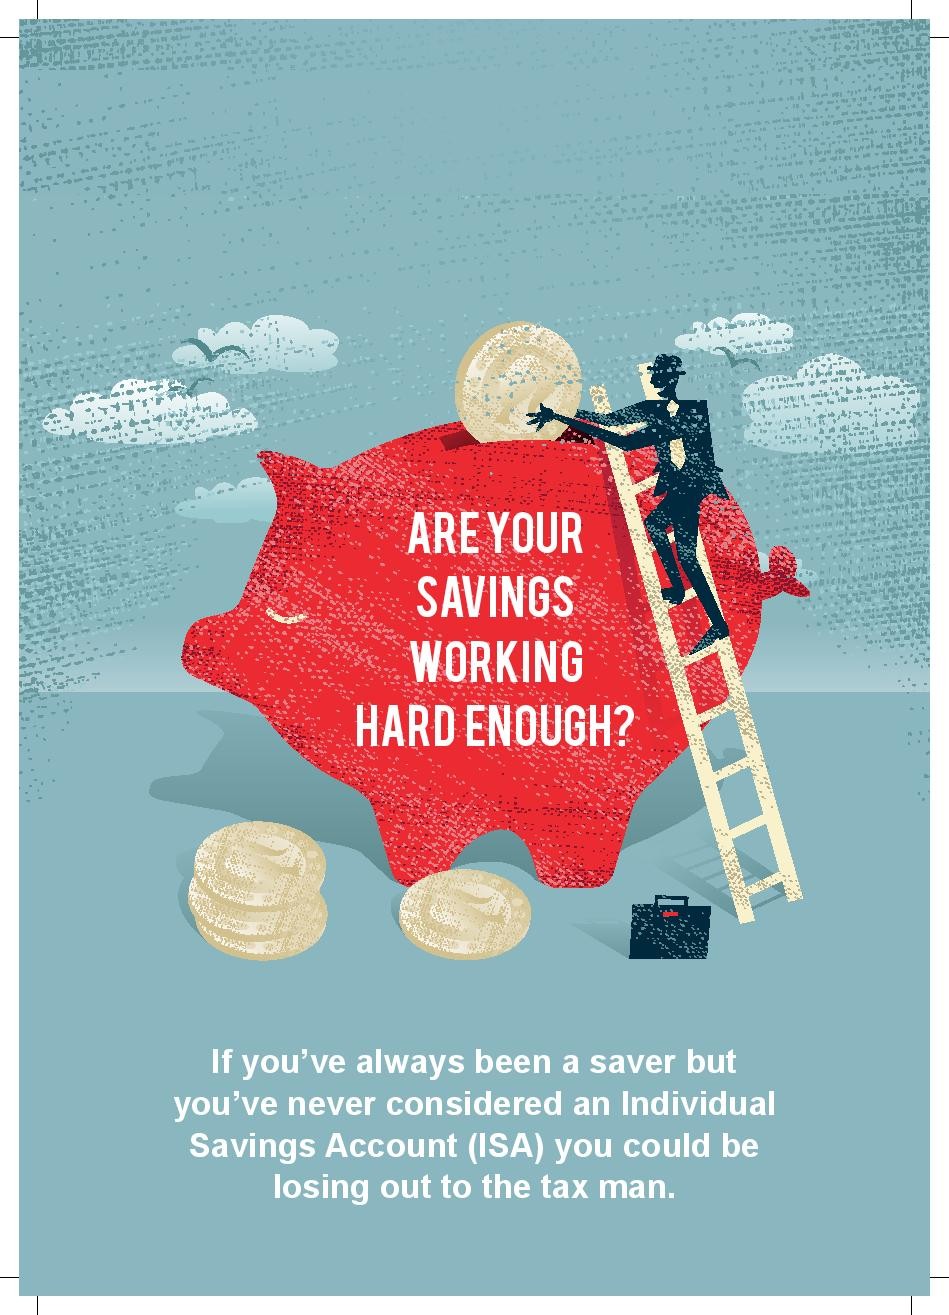 Are your savings working hard enough??